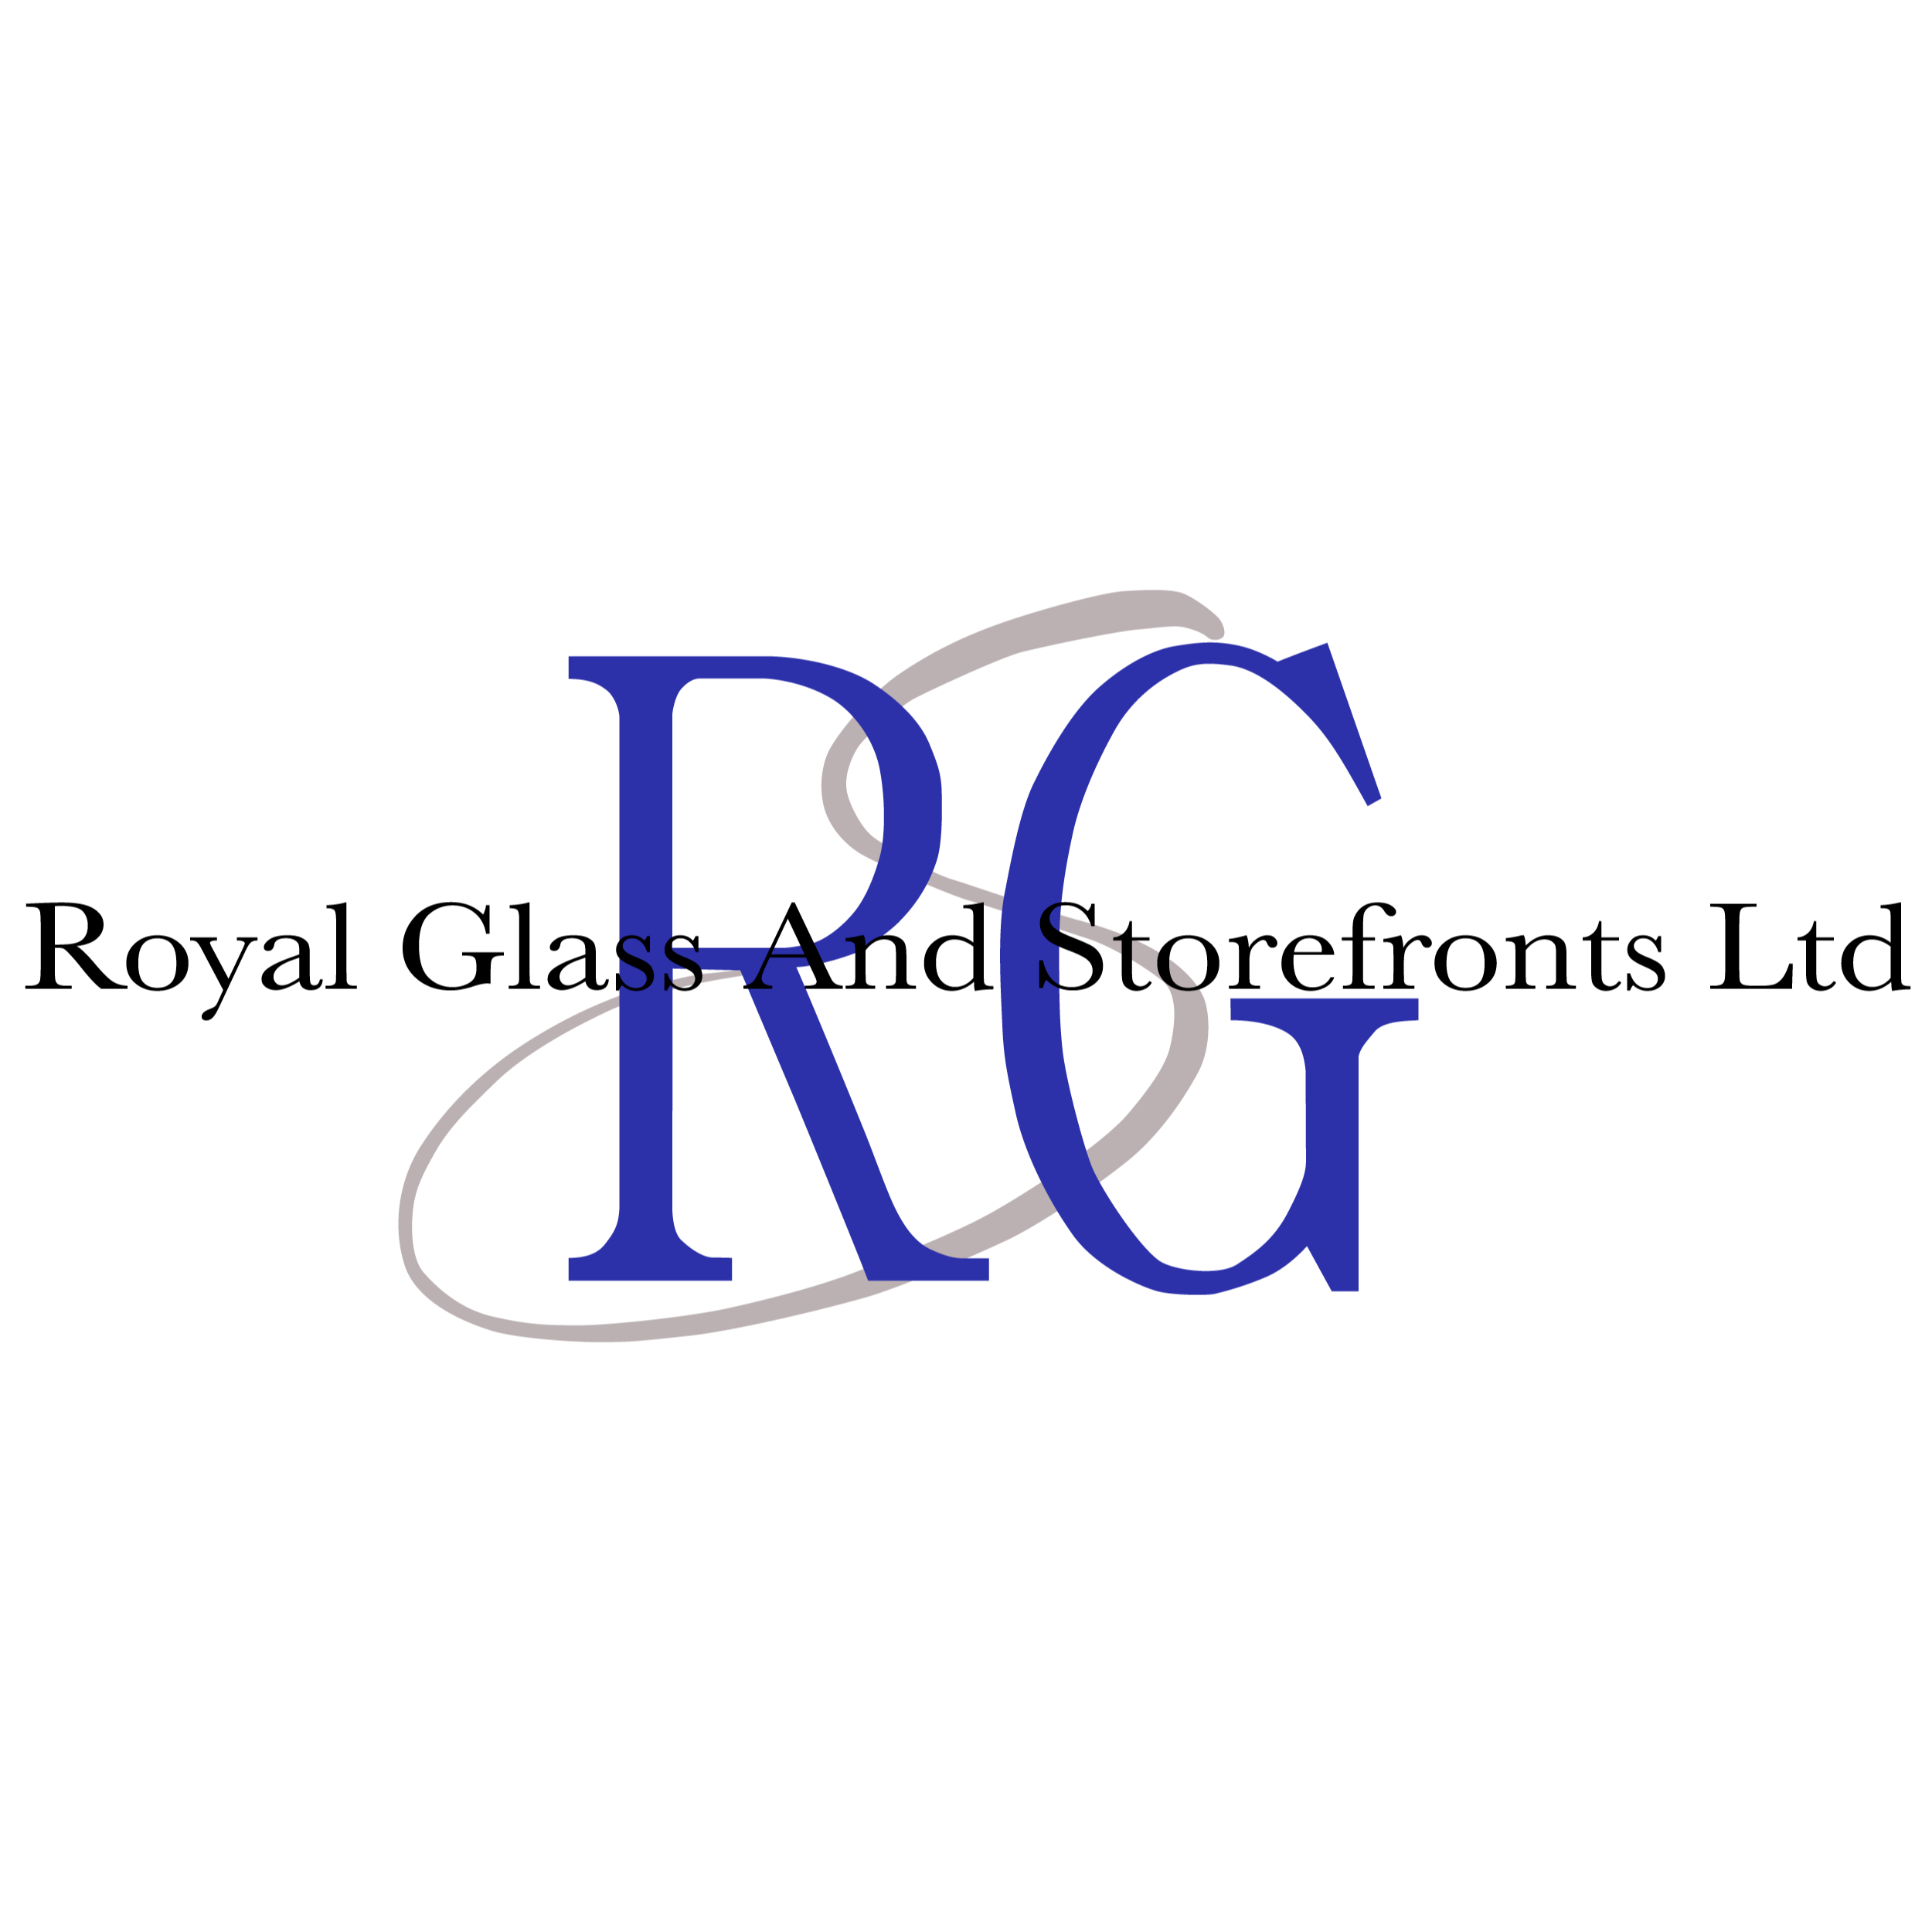 Royal Glass and Storefronts LTD.